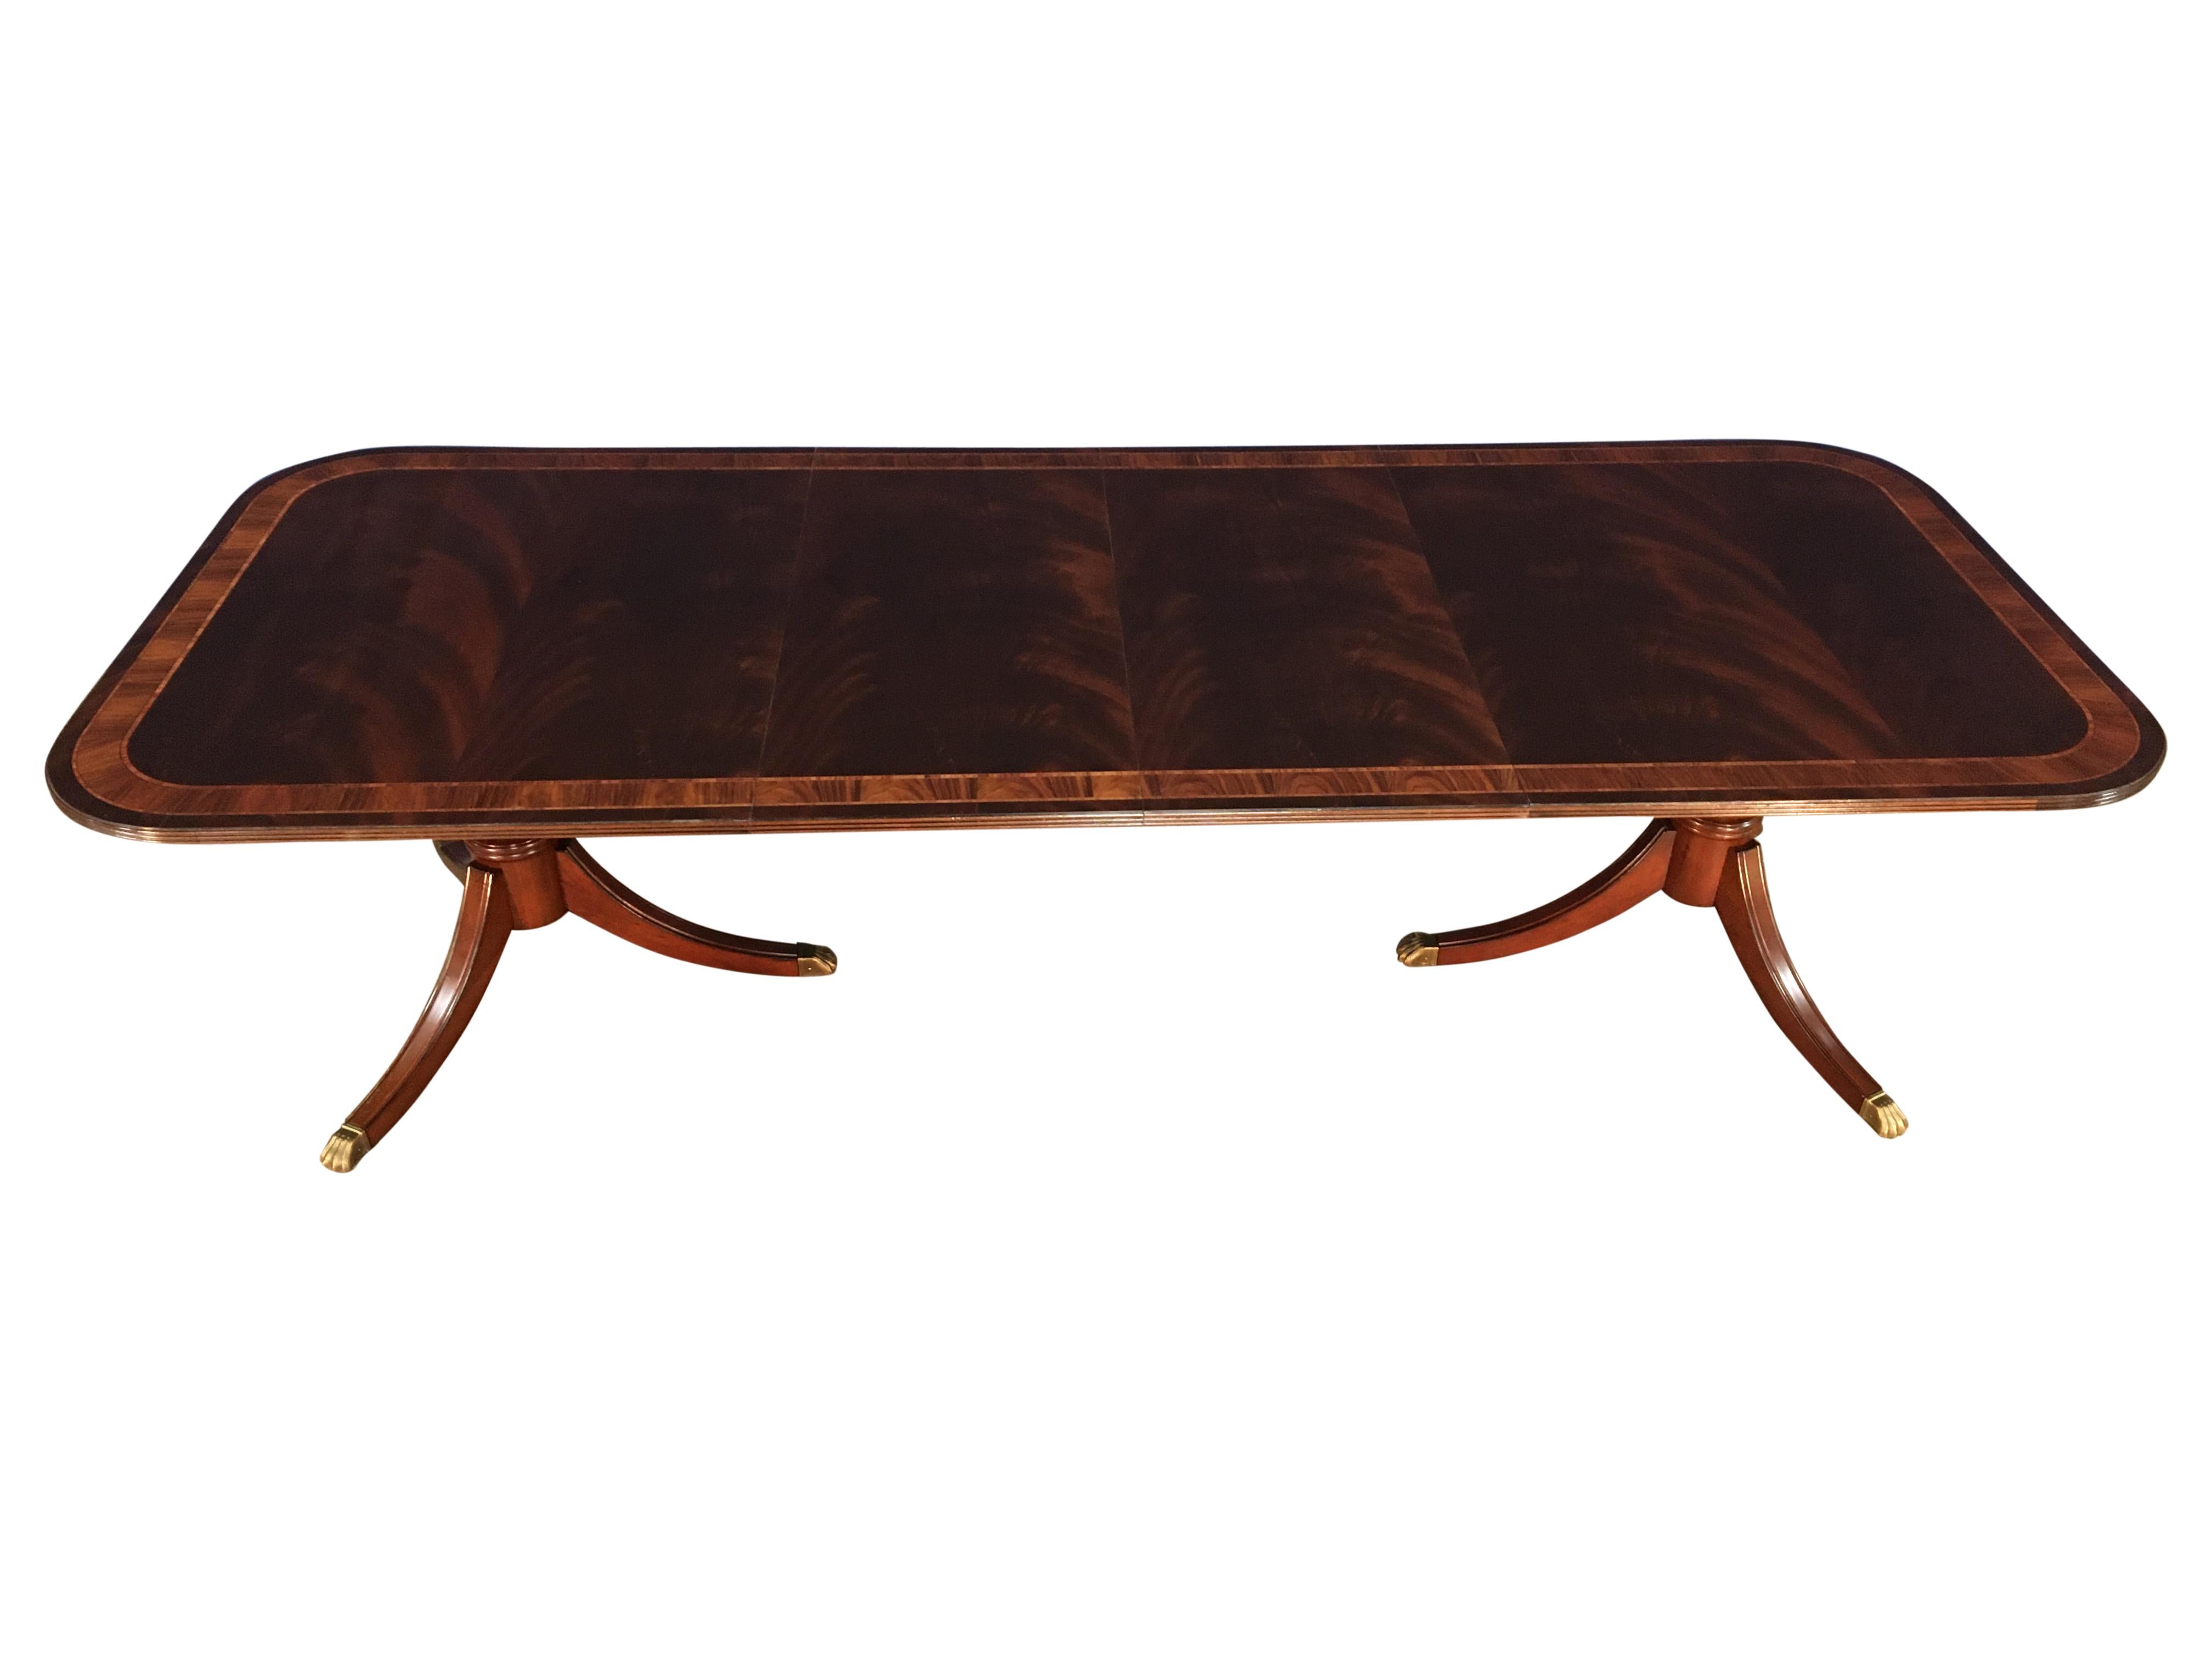 This is a made-to-order traditional mahogany dining table made in the Leighton Hall shop. It features a field of slip-matched swirly crotch mahogany from West Africa. It has a swirly crotch mahogany outer border with a Santos rosewood inner border.